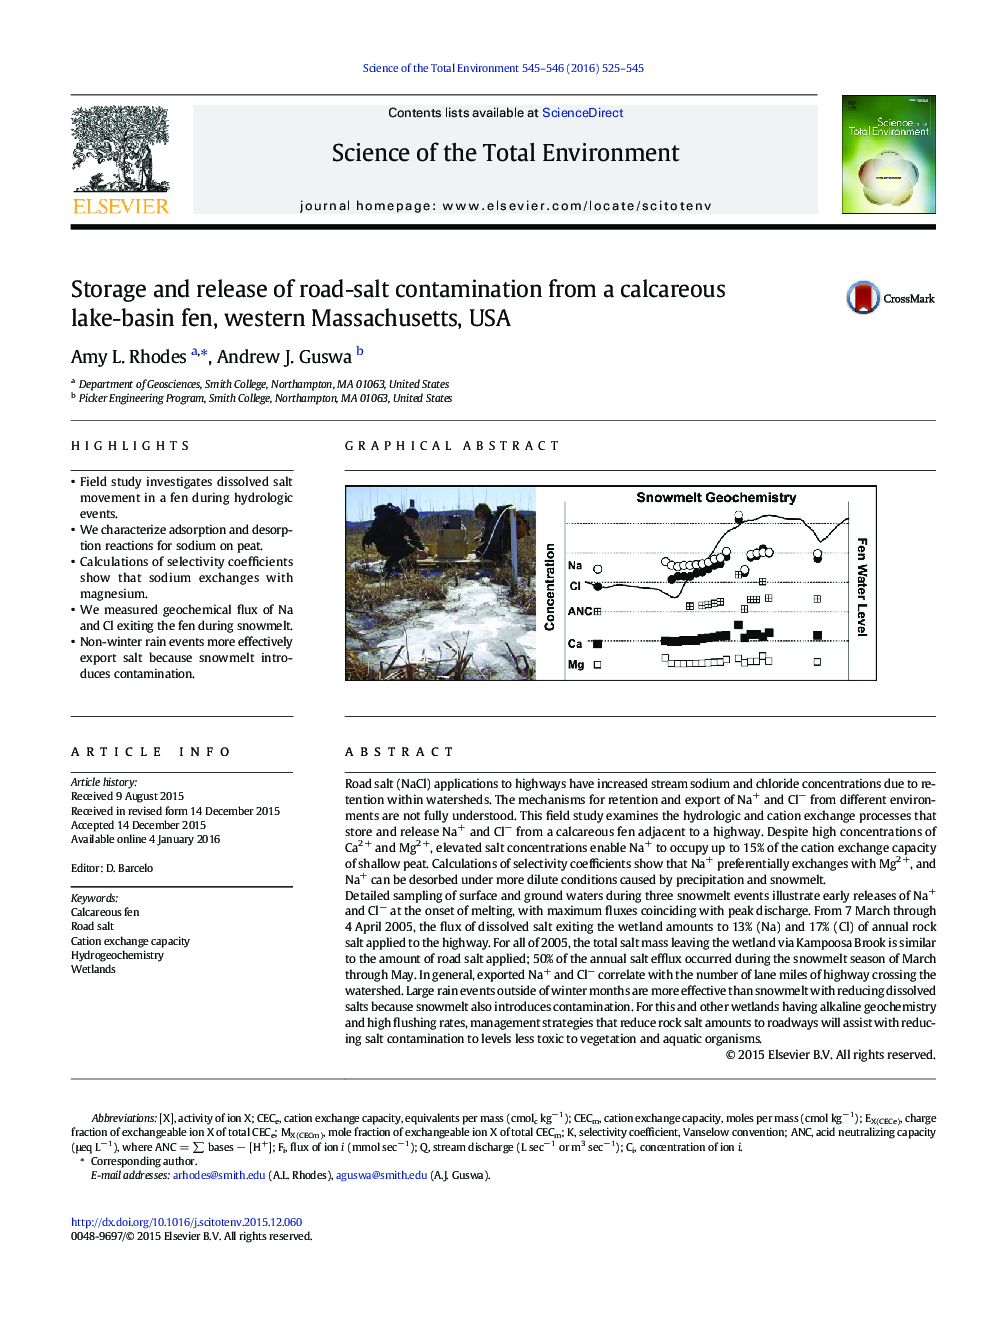 Storage and release of road-salt contamination from a calcareous lake-basin fen, western Massachusetts, USA